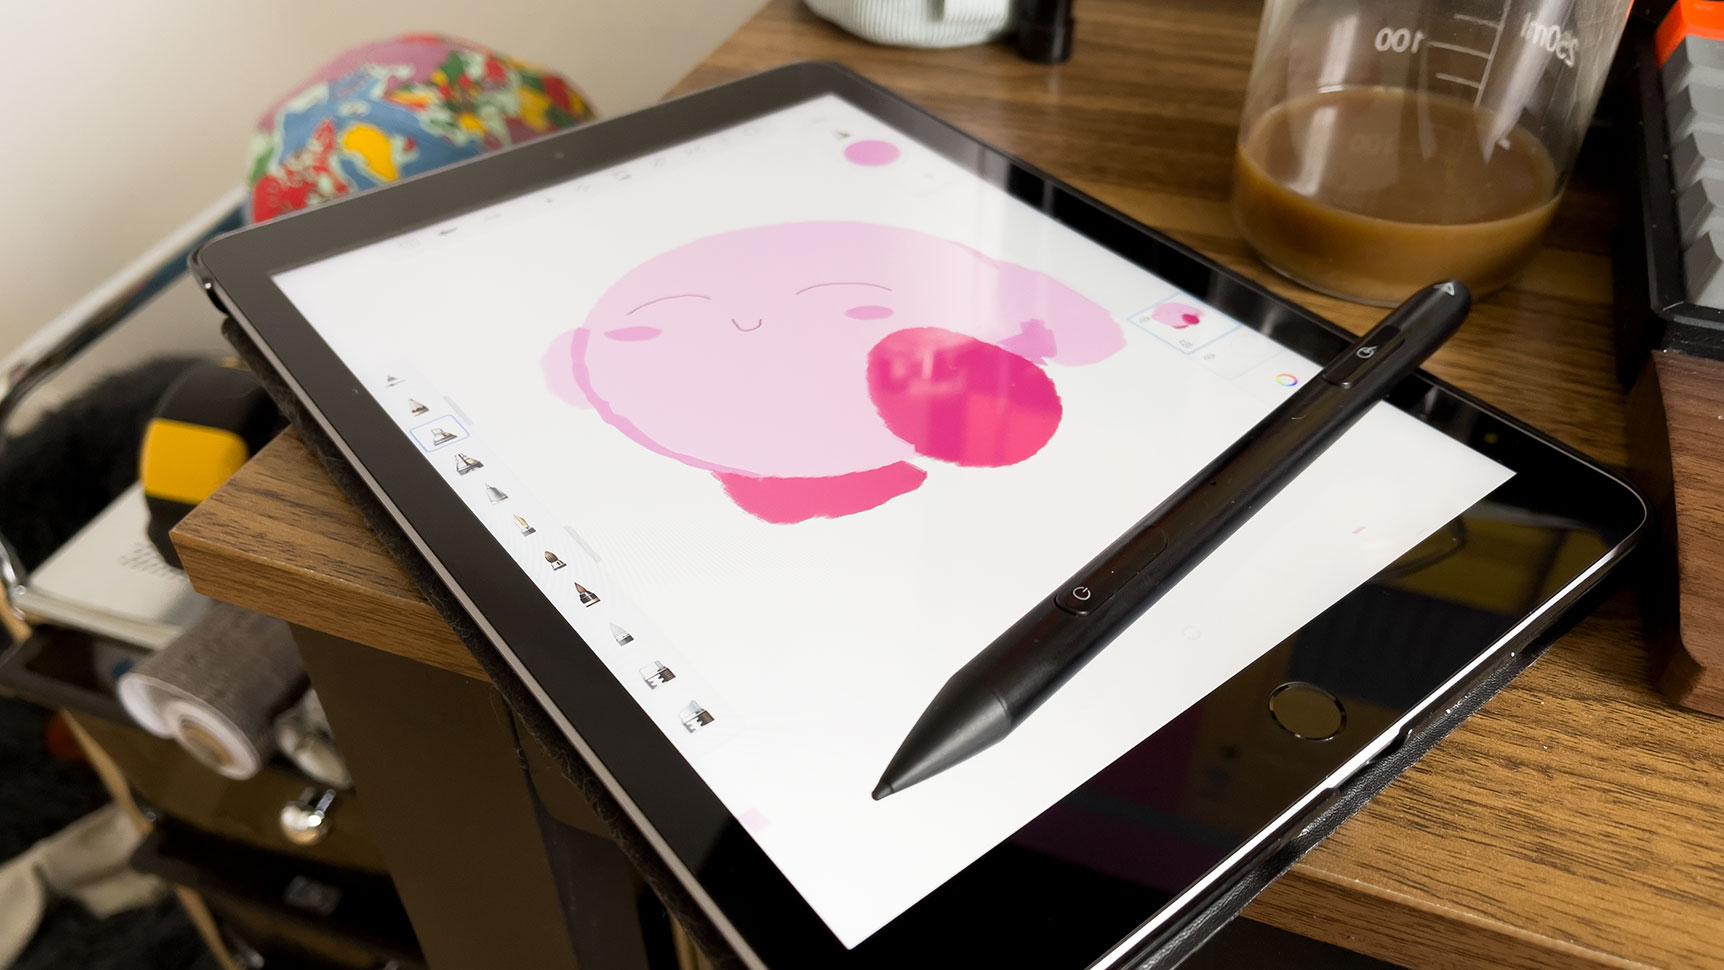 The Note-M is ok for sketching simple puffballs like Kirby, but the lack of pressure sensitivity isn't the best for artists. (Photo: Victoria Song/Gizmodo)